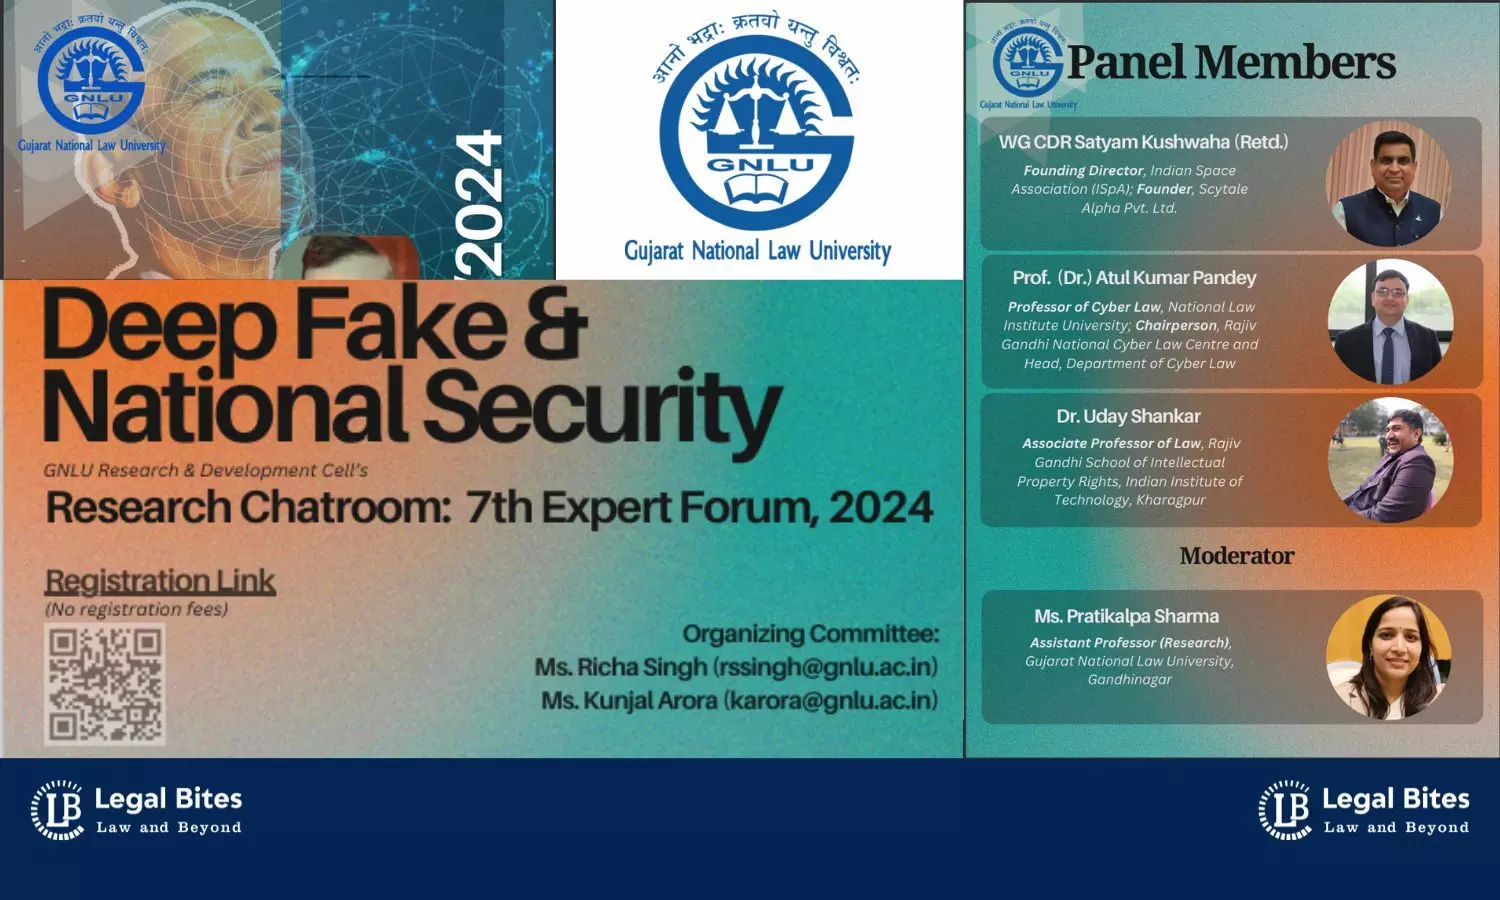 GNLU | 7th Edition of Research Chatroom on Deep Fake & National Security | May 31, 2024